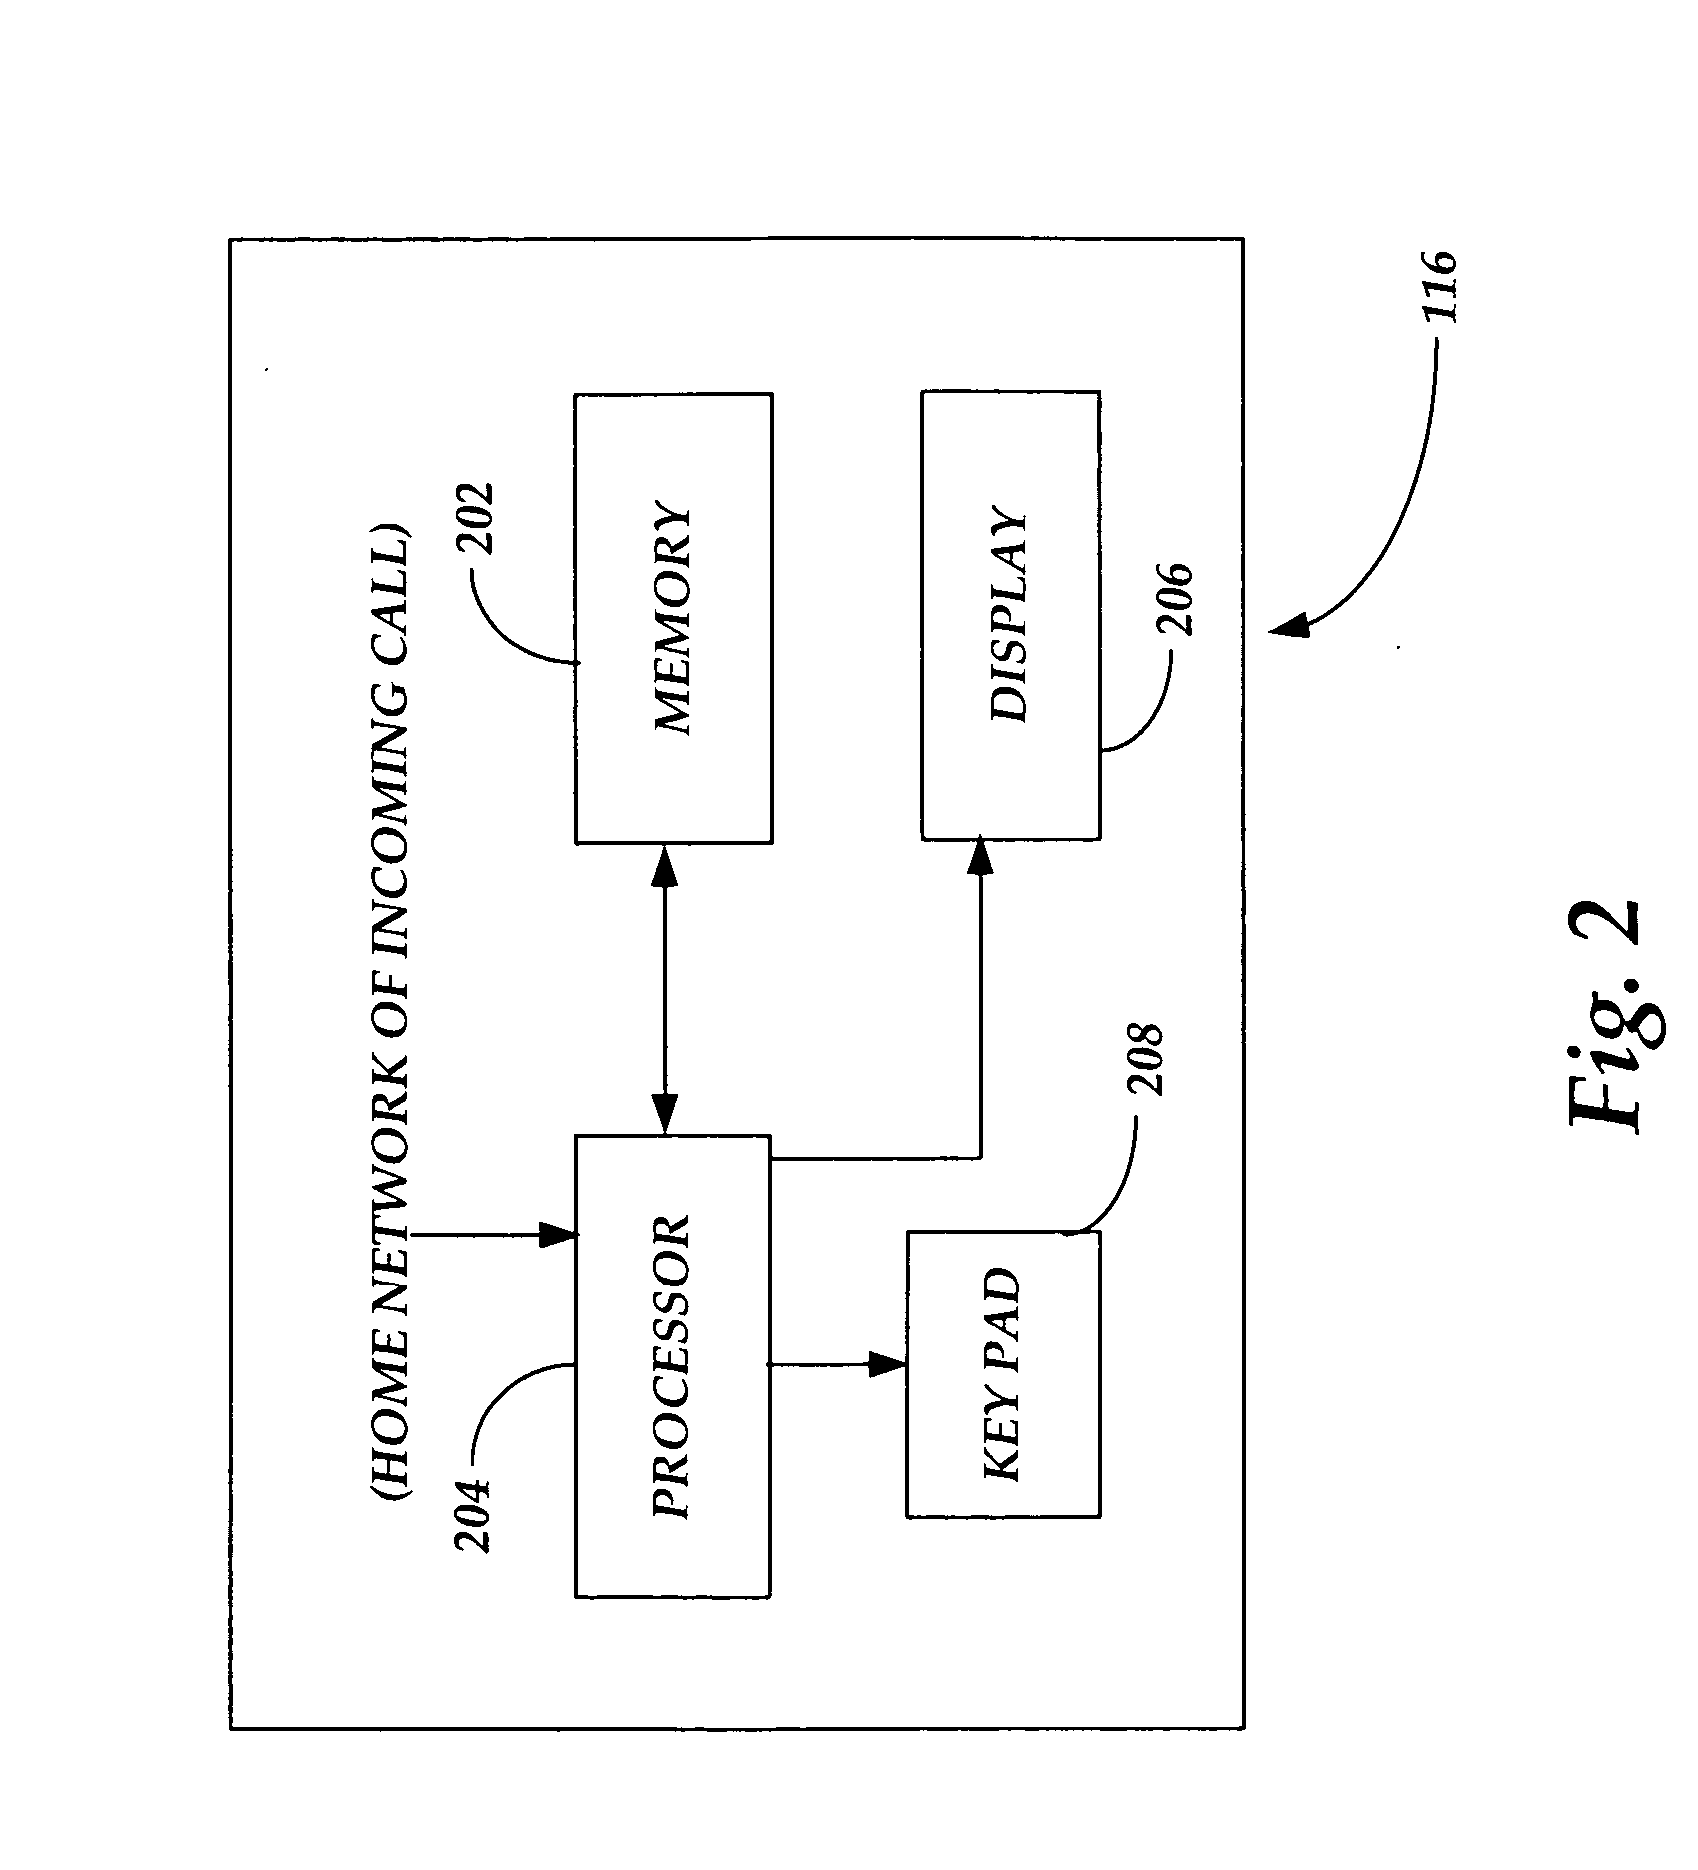 Methods and apparatus for recognizing home network provider of incoming wireless calls